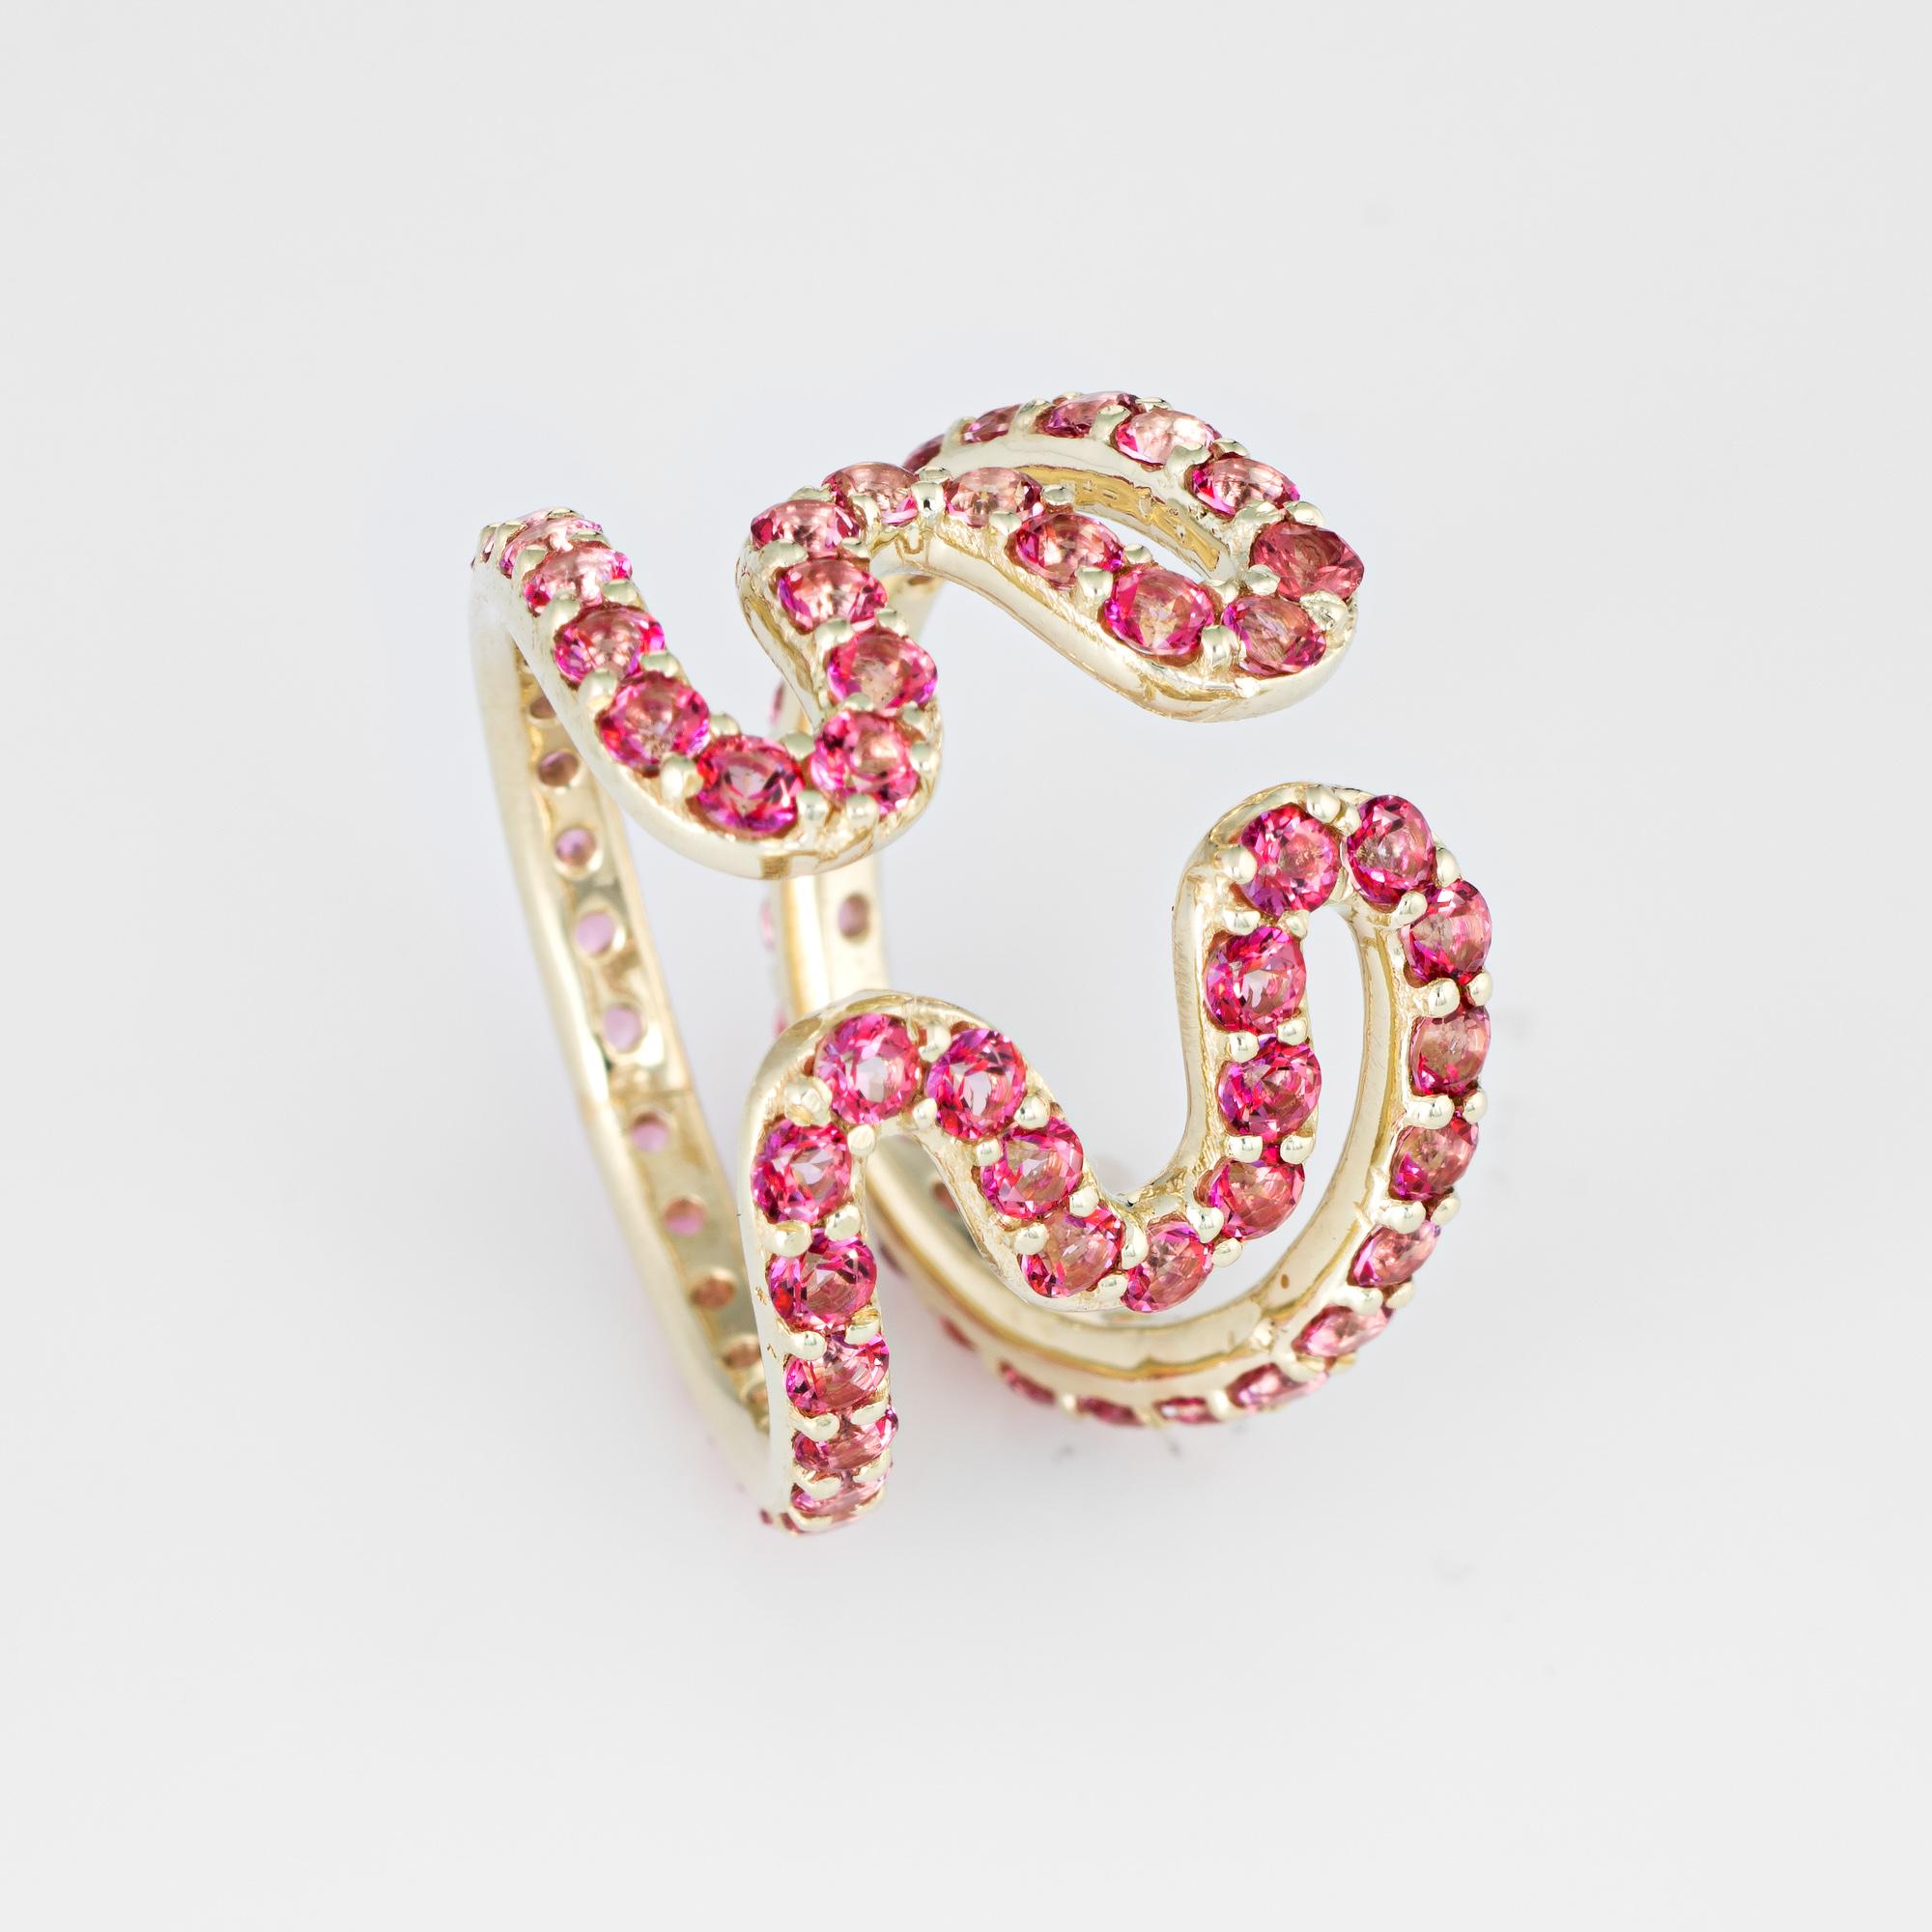 Stylish Sabine Getty pink topaz 'wiggly' ring crafted in 18 karat yellow gold. 

Pink topaz totals an estimated 2.88 carats. The topaz is in excellent condition and free of cracks or chips. 

The striking ring is made by Sabine Getty, a London based